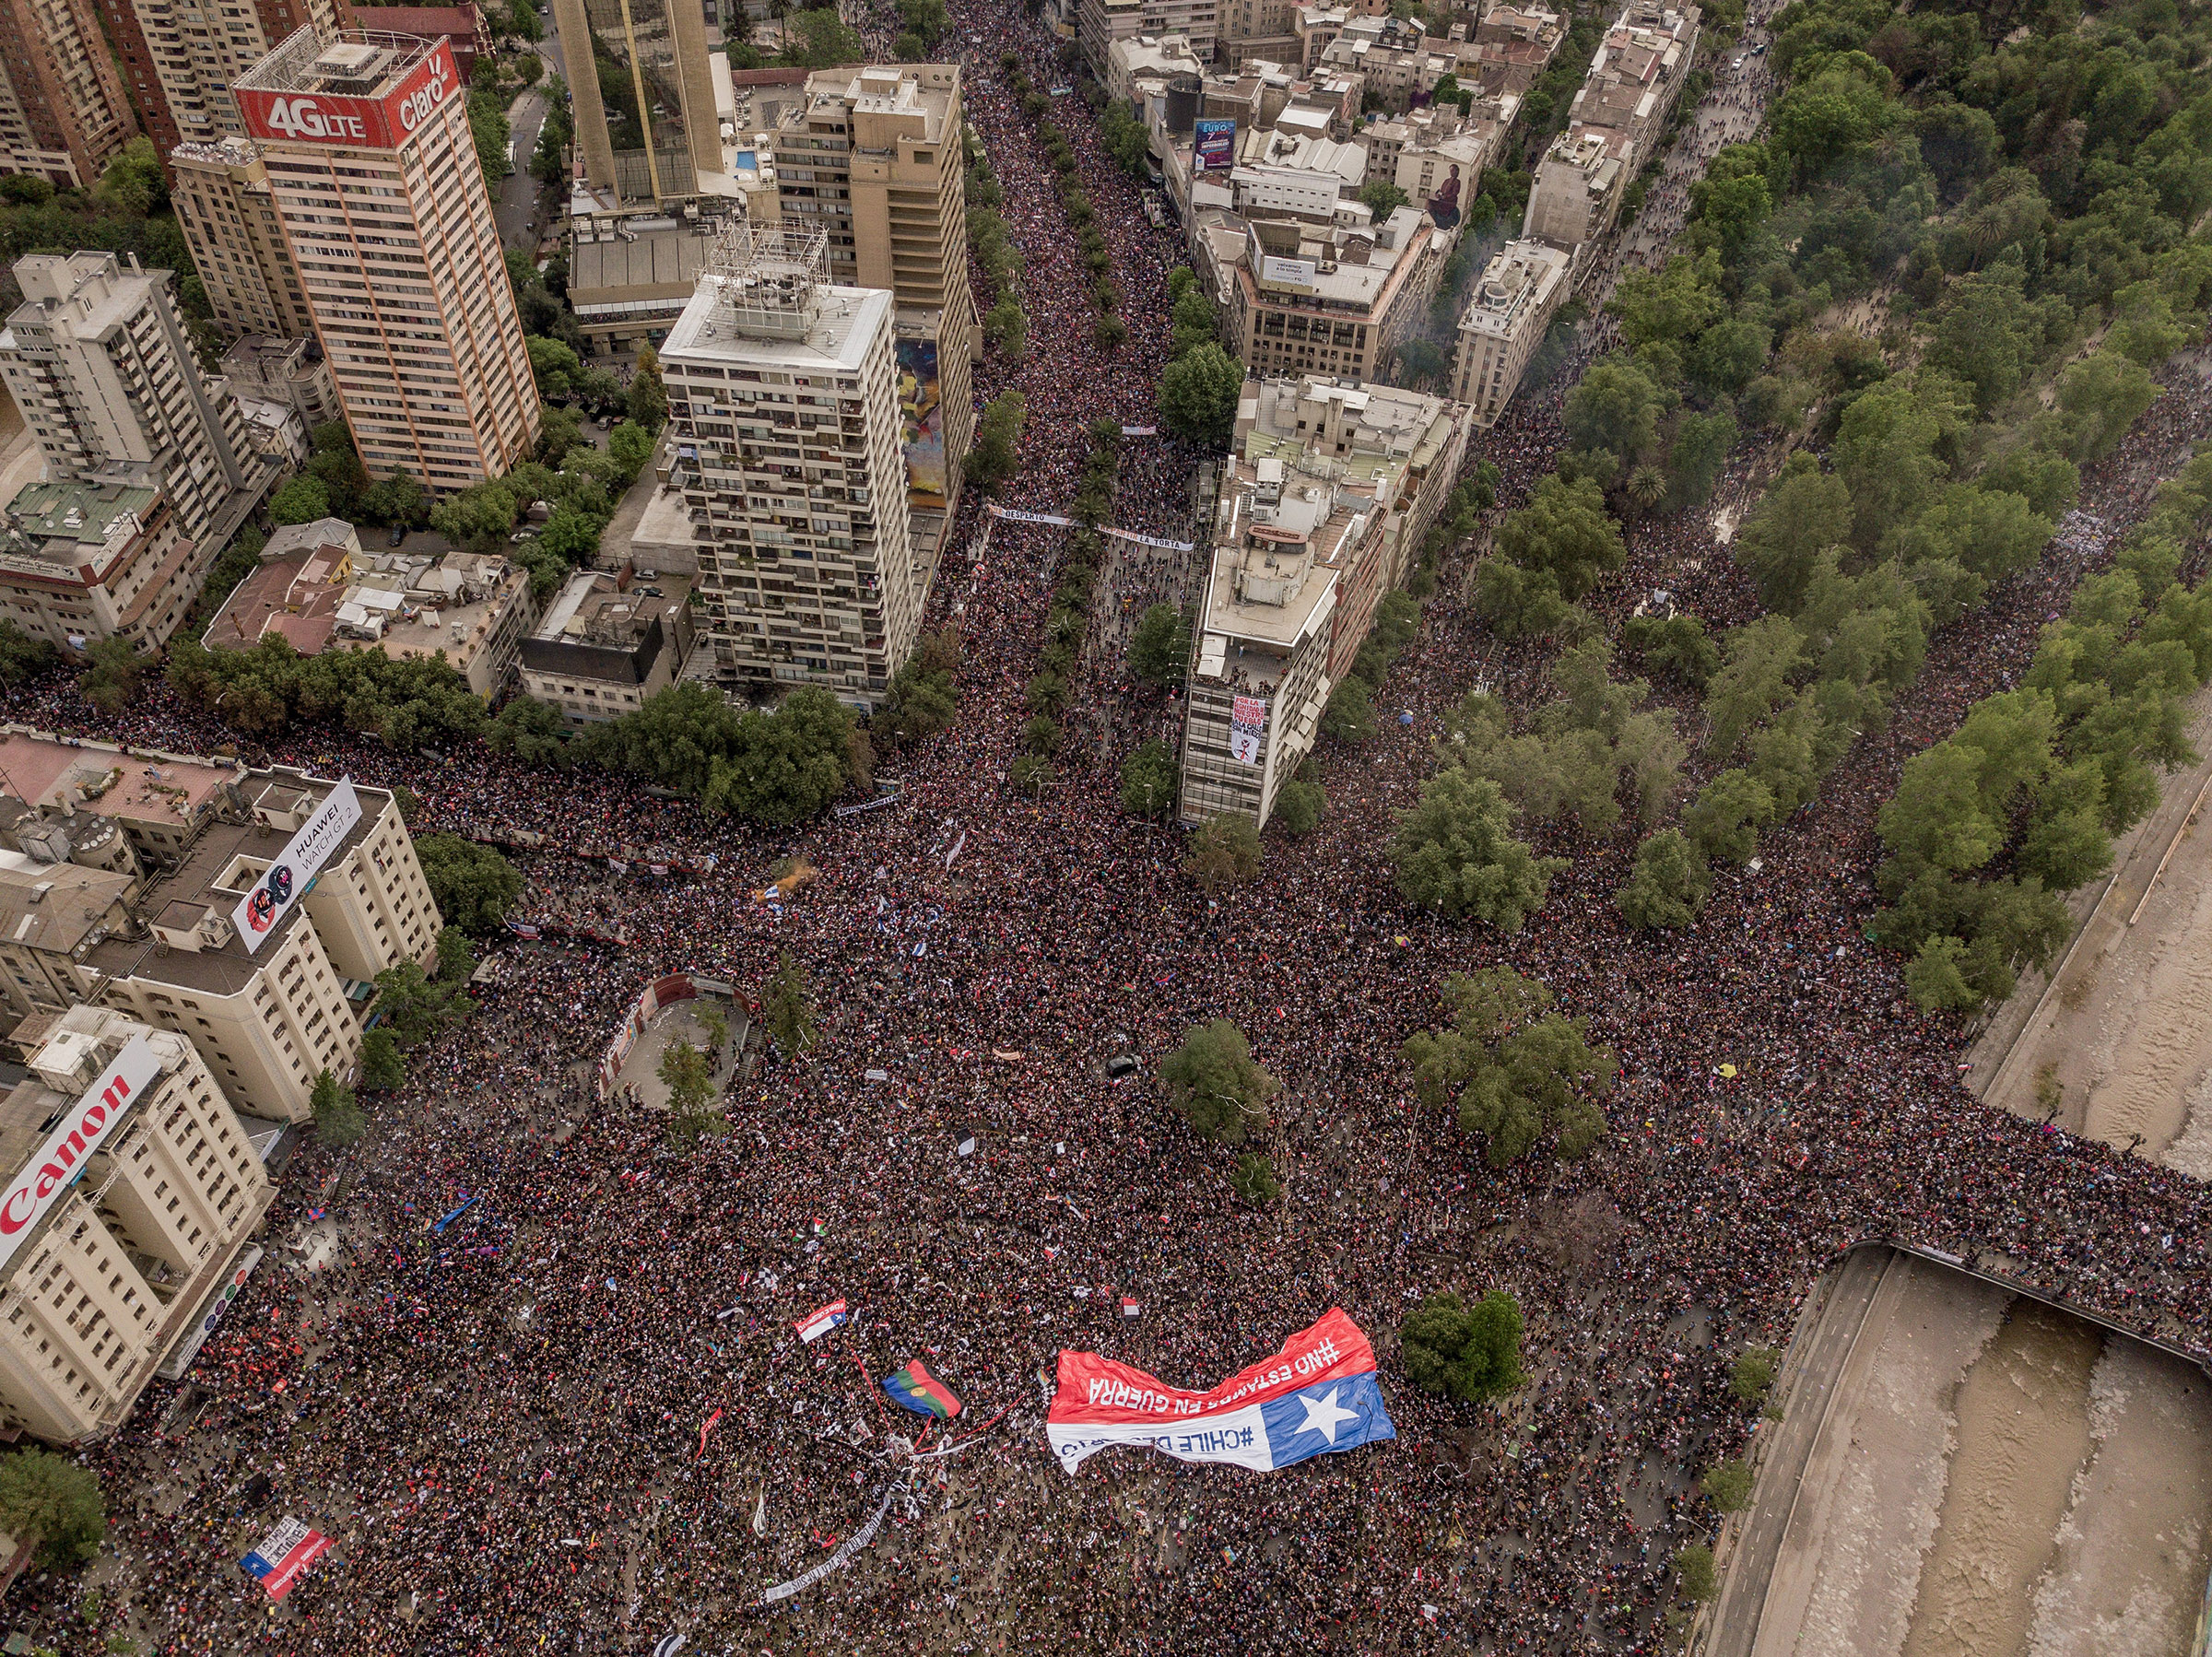 Protesters take to the streets in Santiago, Chile, on Oct. 25, 2019. (Tomas Munita—The New York Times/Redux)